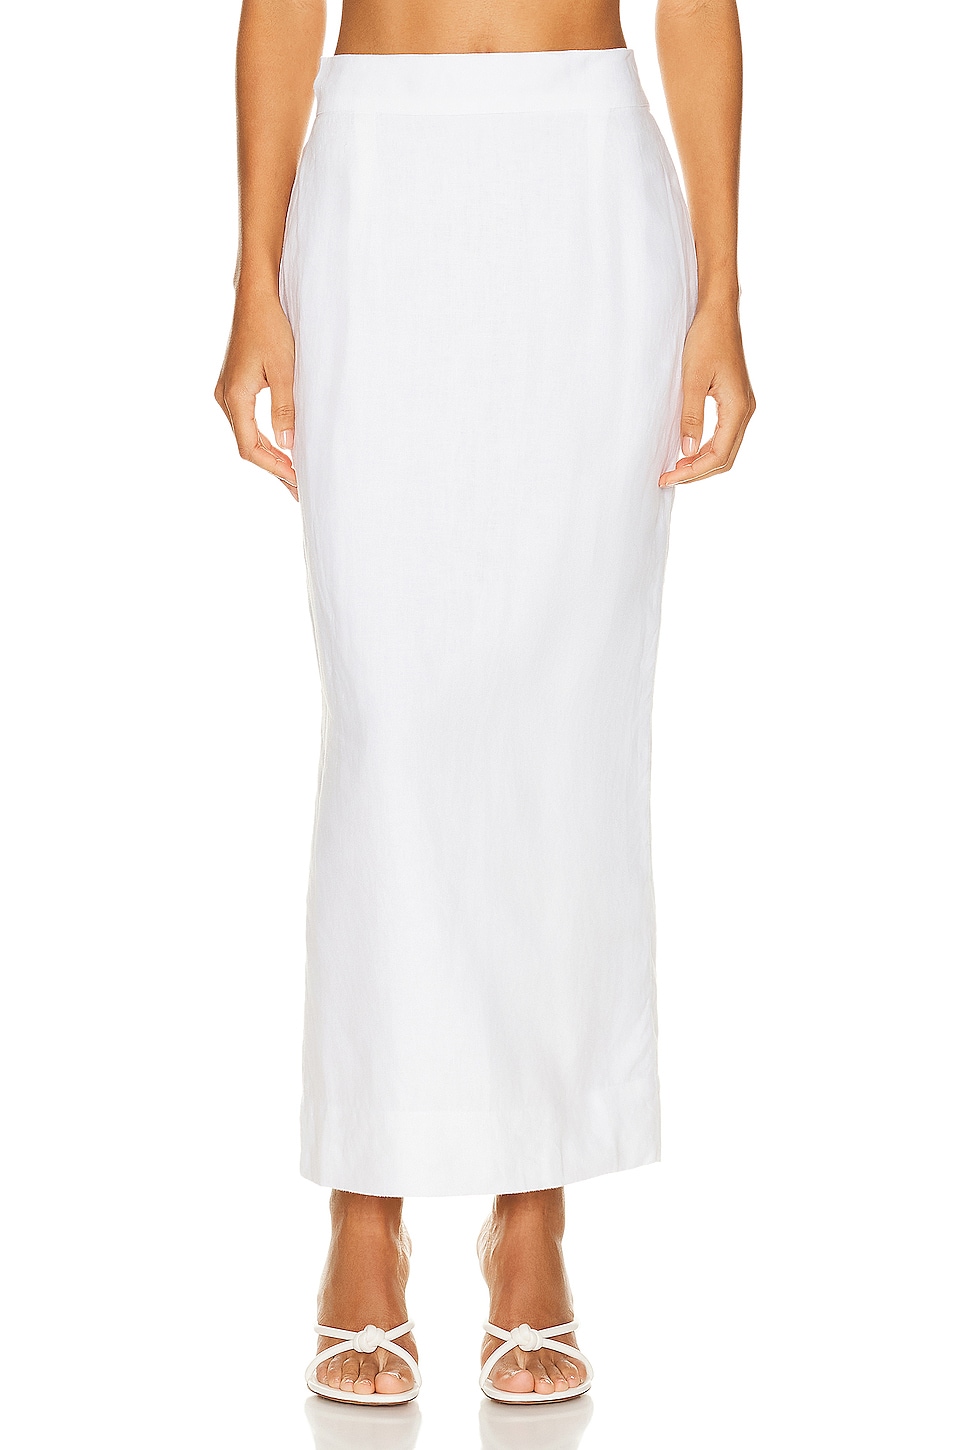 Image 1 of Posse Emma Pencil Skirt in Ivory